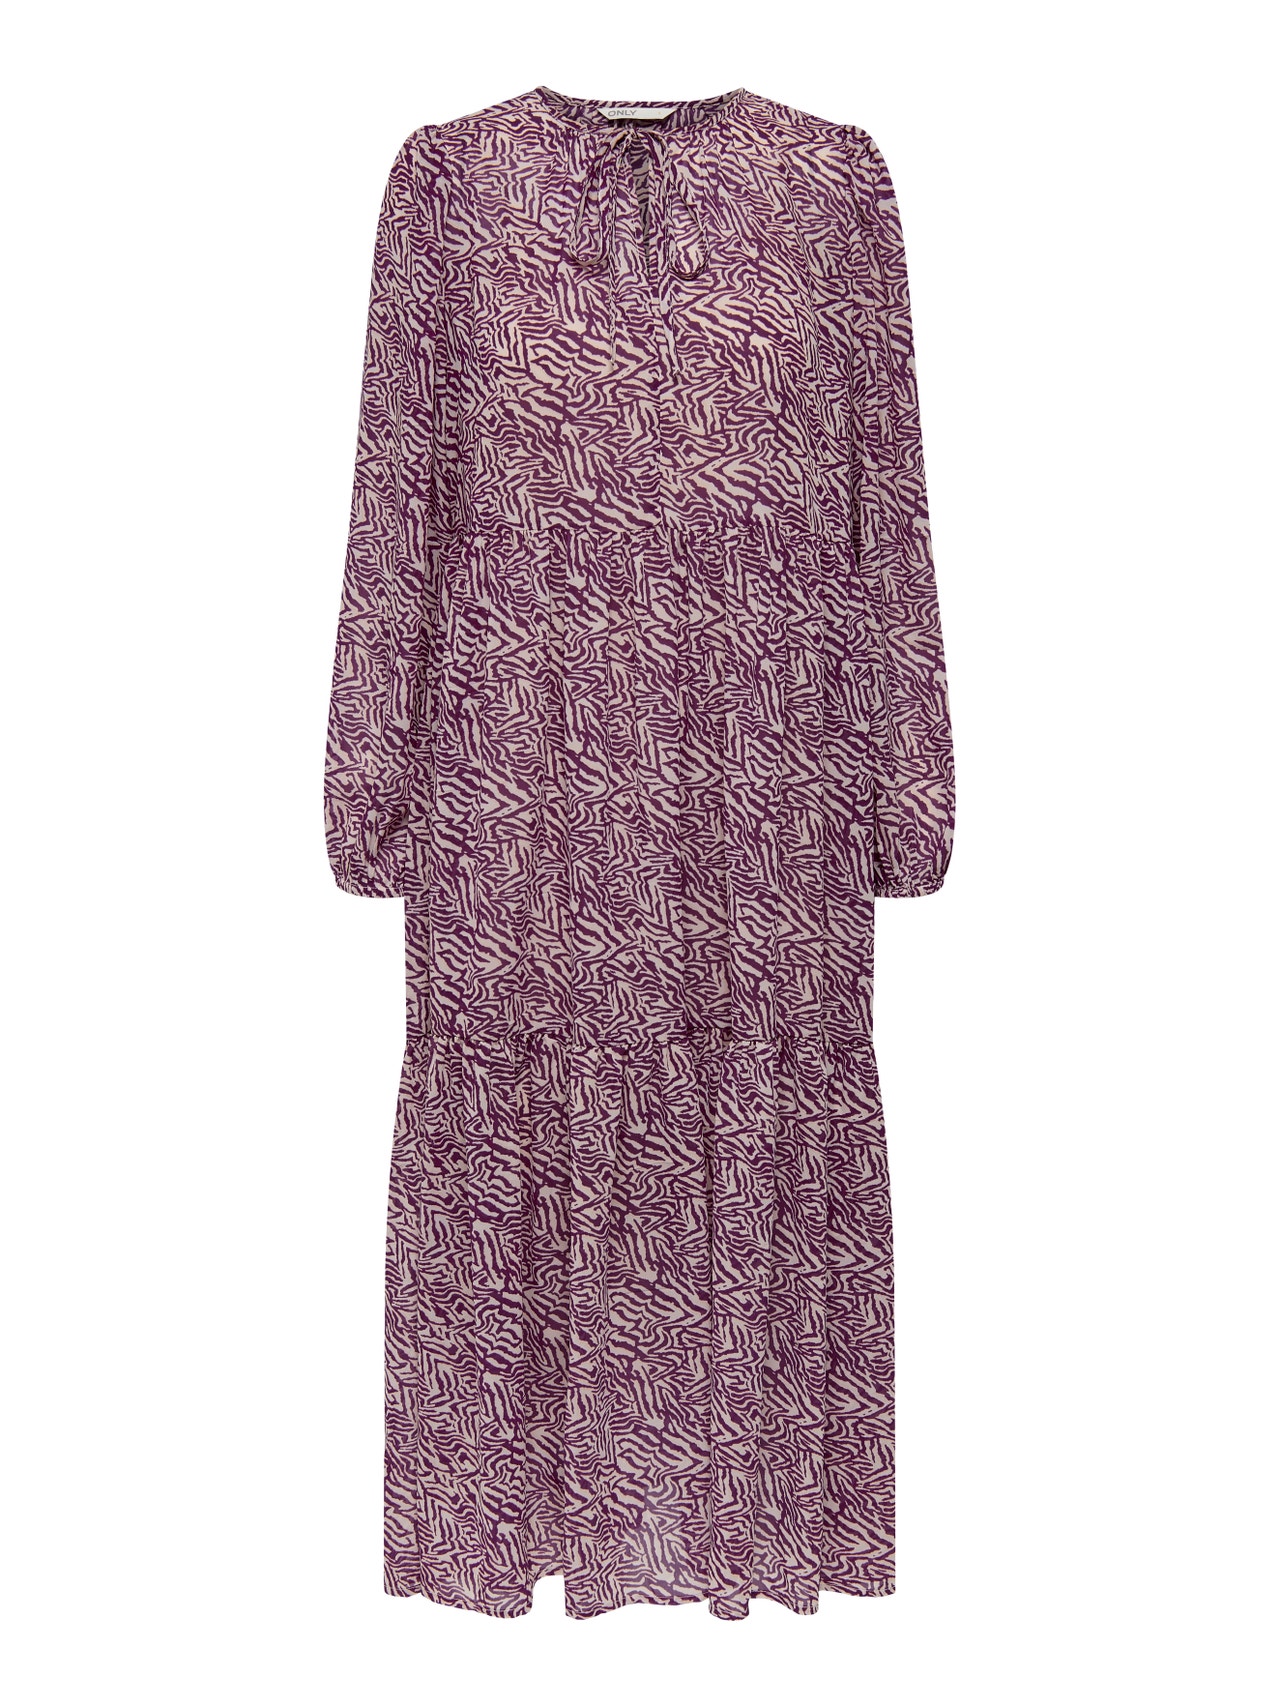 ONLY ONLSTAR LS LARGE MANCHE ROBE MAXI WVN Robe longue -Wood Violet - 15235766